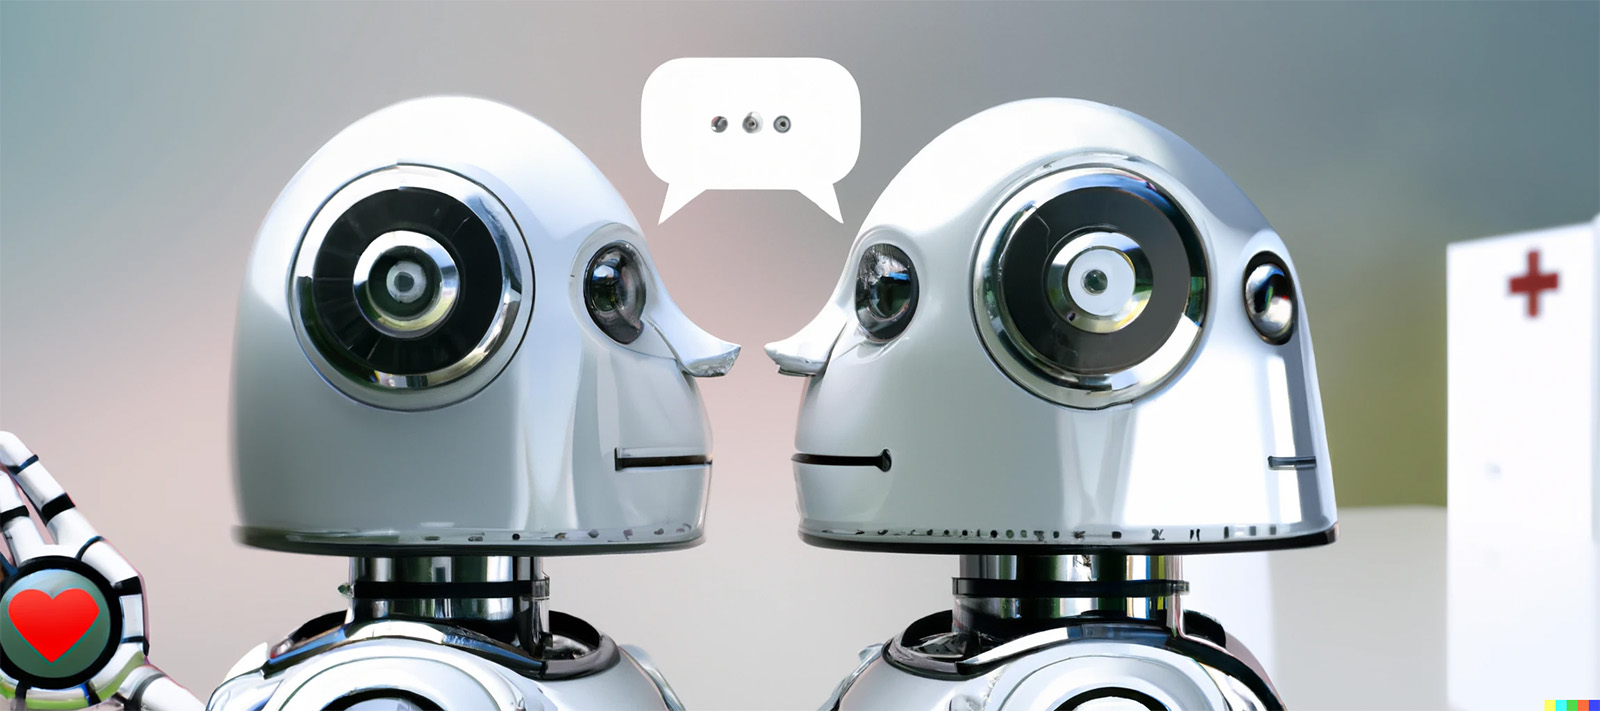 two robots speaking representing AI